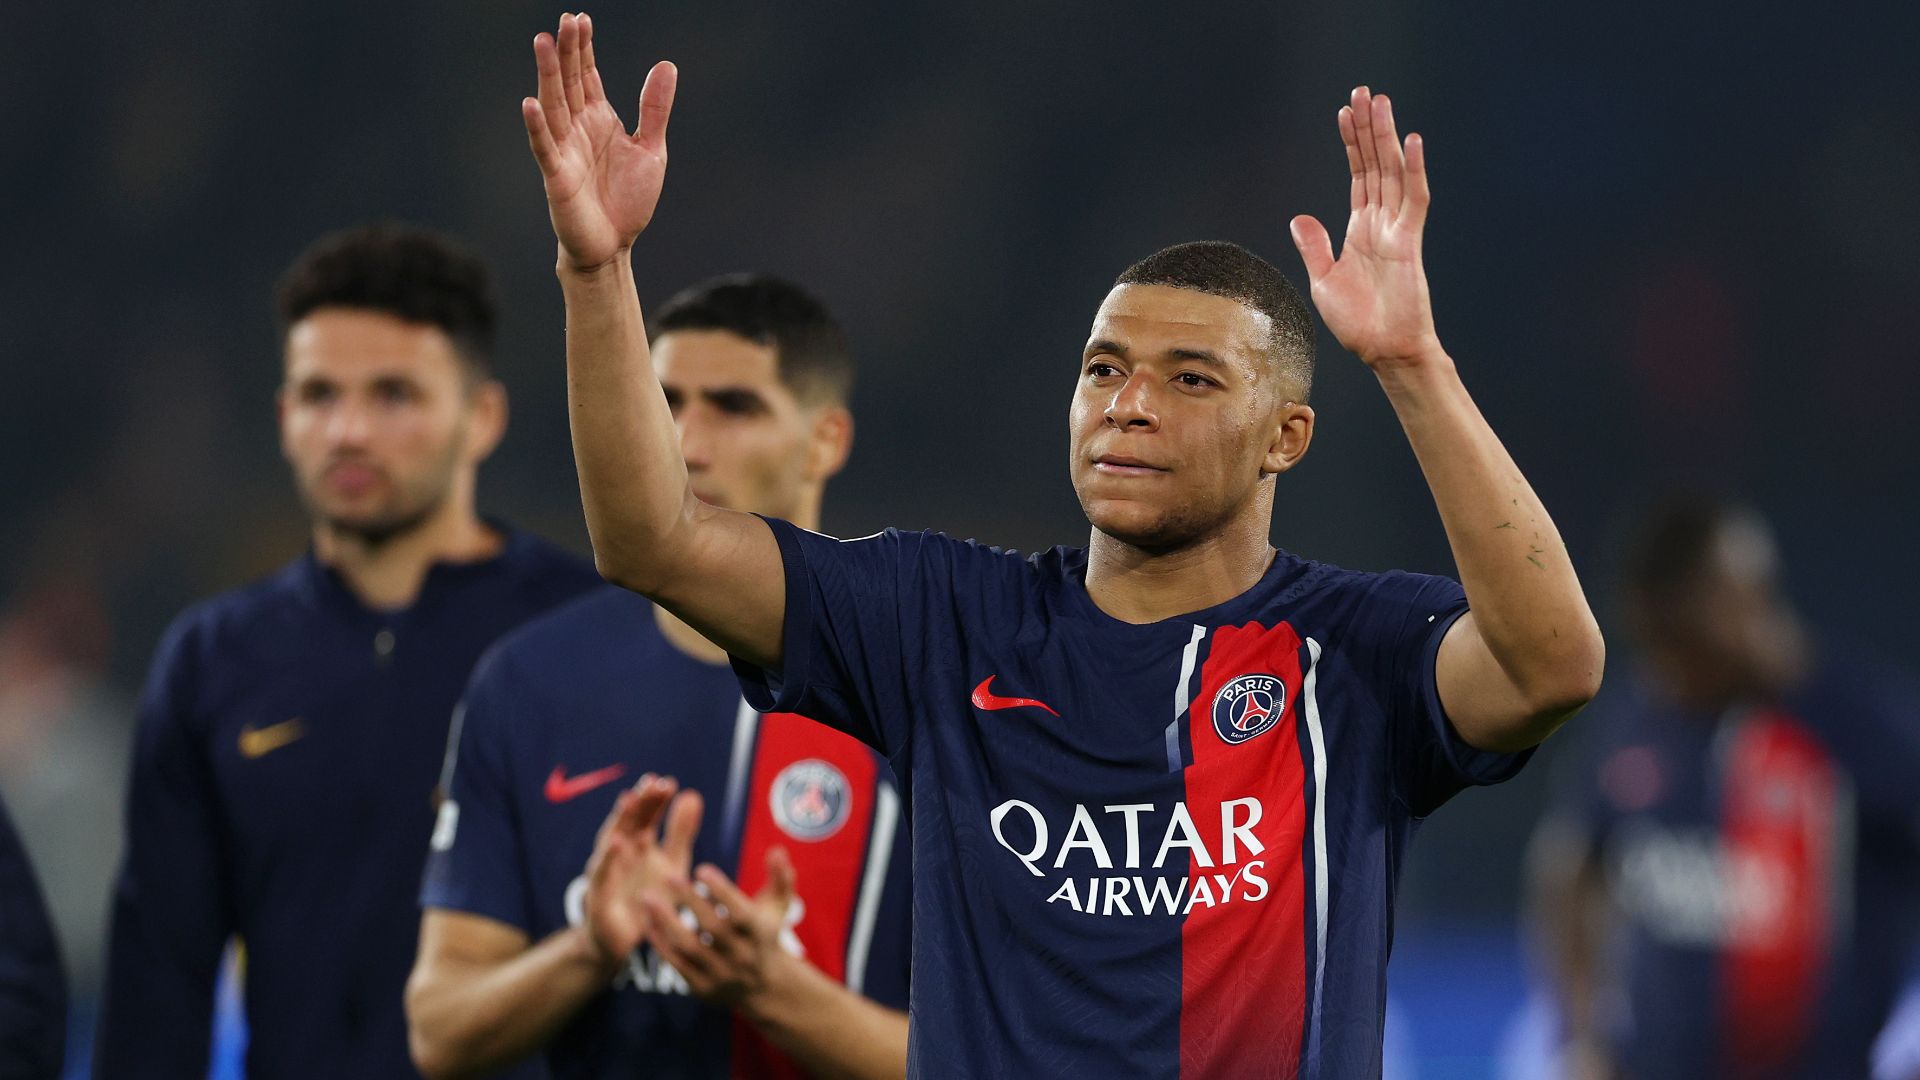 Mbappe admits 'I didn't do enough' following PSG's Champions League exit |  beIN SPORTS